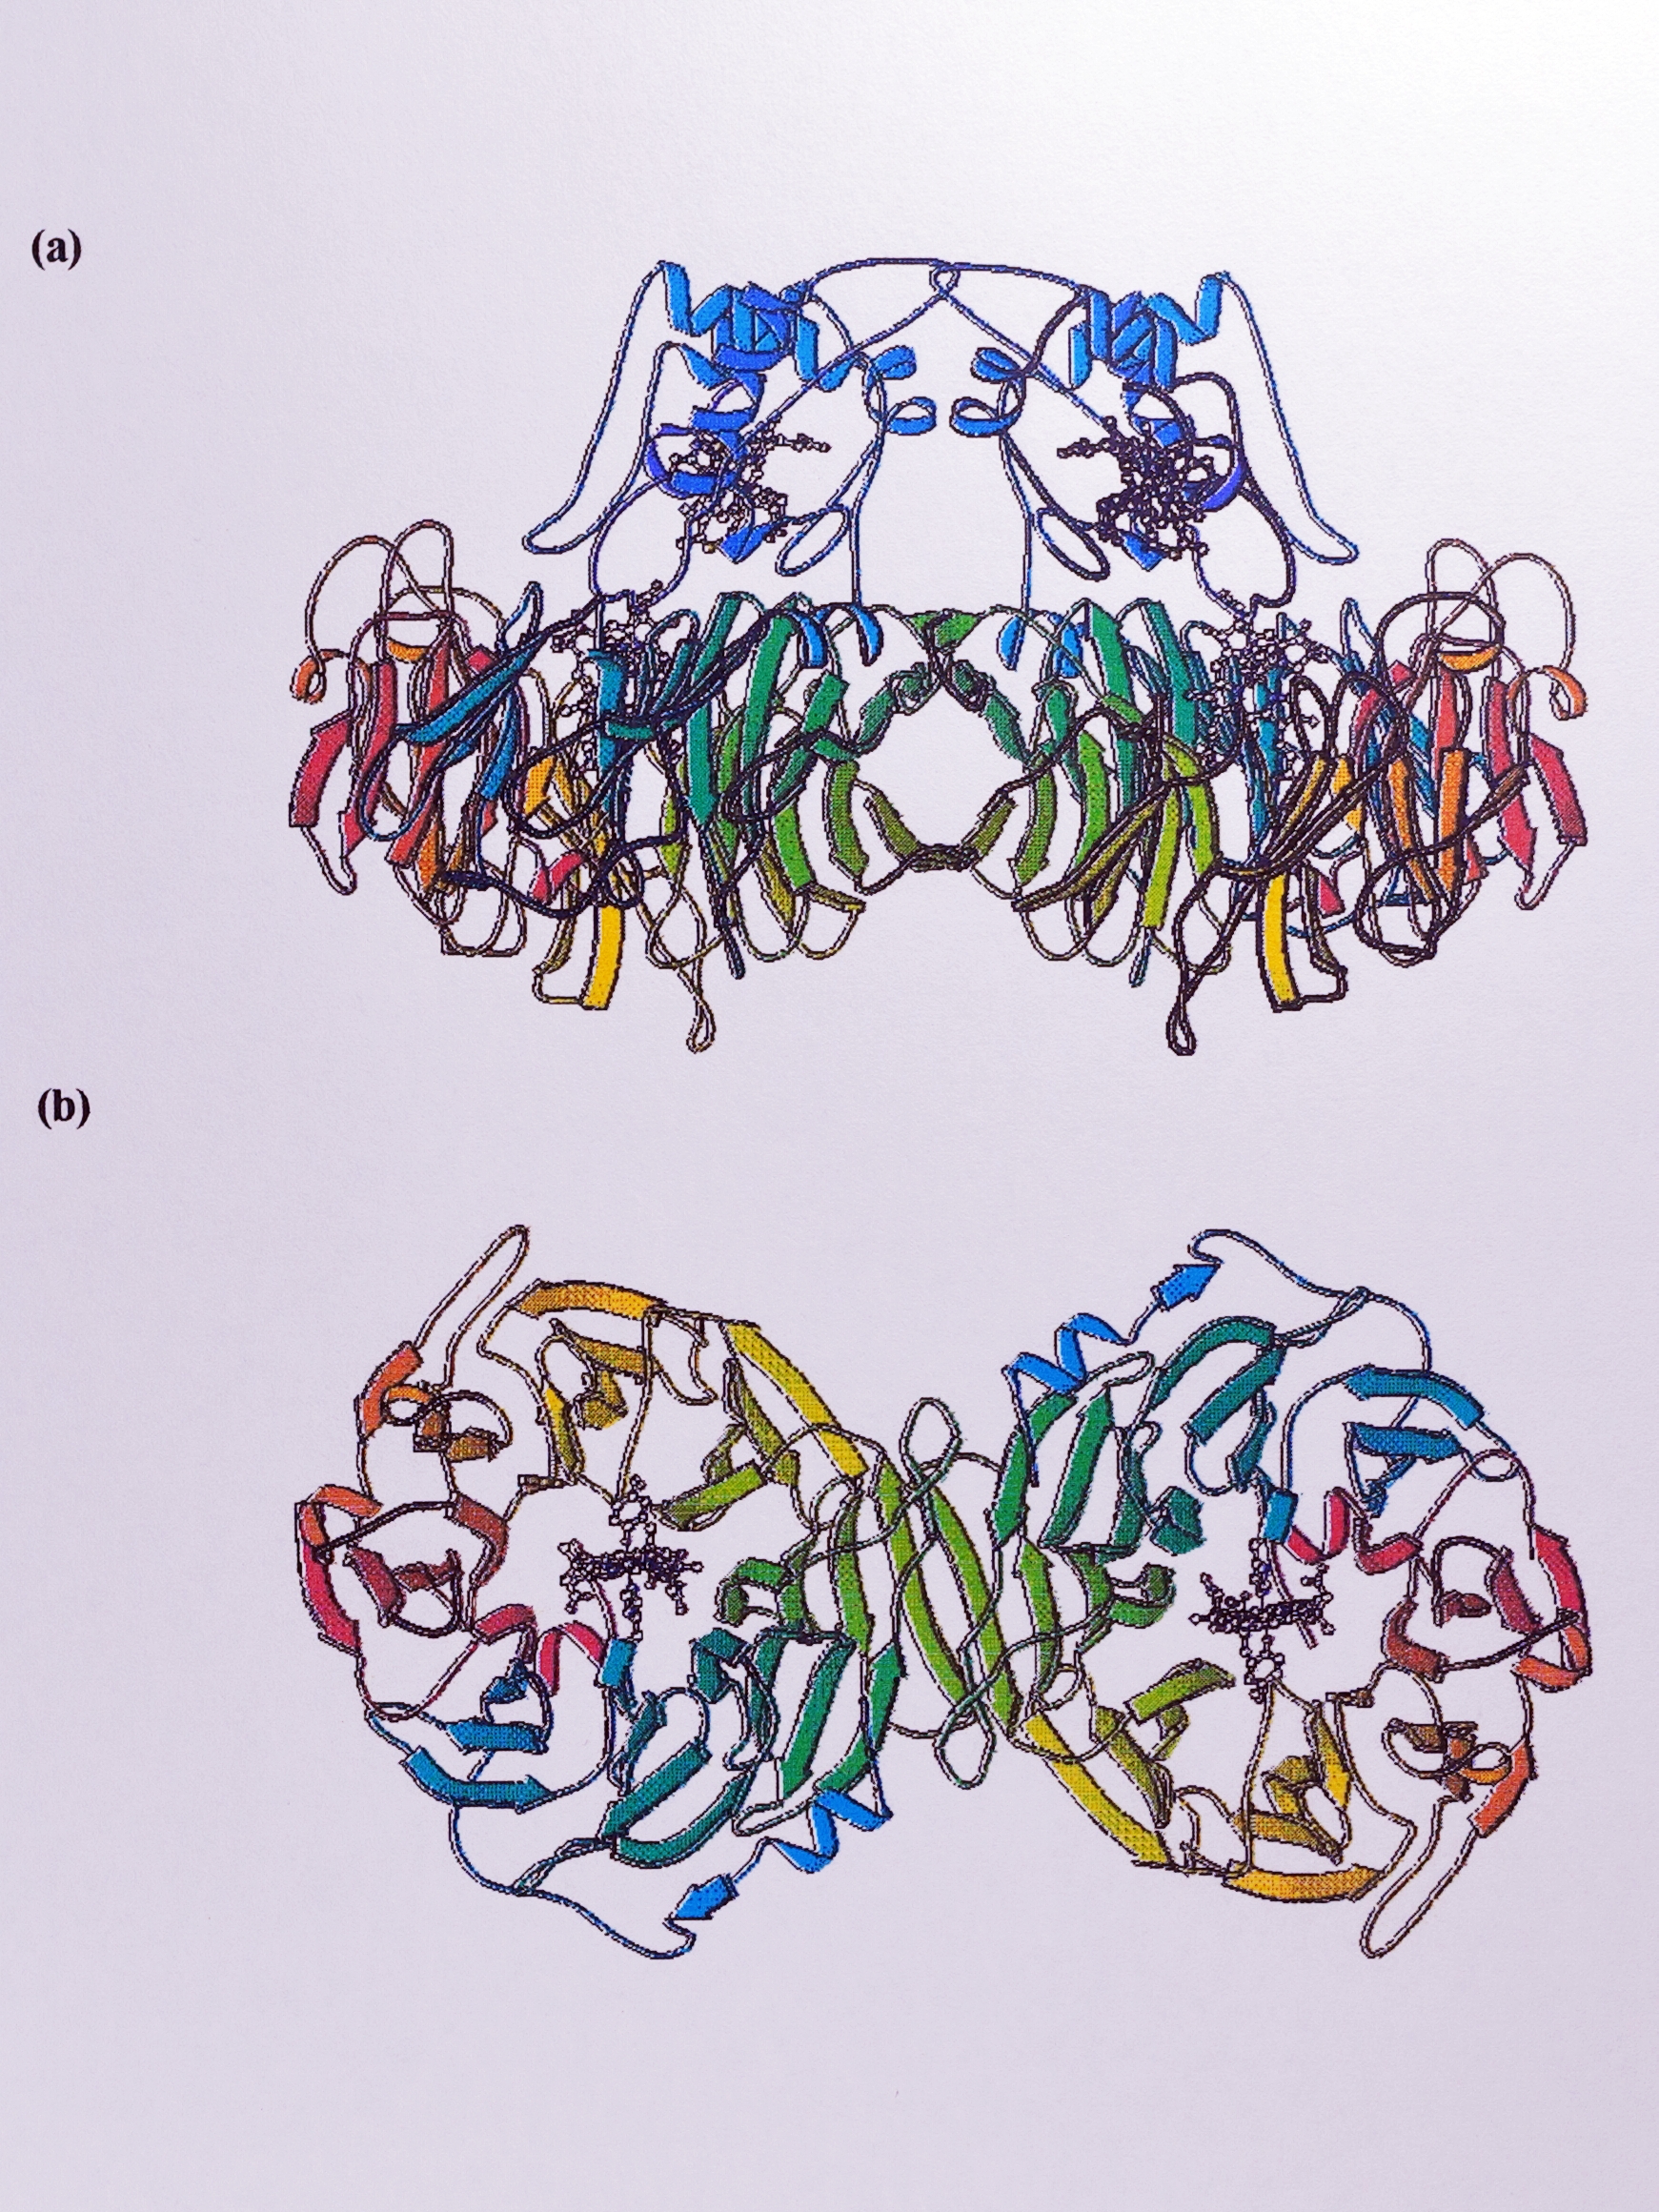 Crystal structure of cytochrome _cd_$_1$ in the oxidised form from _T. pantotropha_. Taken from Fülöp _et al_. (1995) [@fulop_anatomy_1995]. (a) shows the dimeric molecule with the $\alpha$-helical _c_-haem domain at the top and the $\beta$-propeller _d_$_1$ haem domain below. (b) shows the _d_$_1$ haem domains of each subunit from below, clearly illustrating how the eight-fold $\beta$-propeller structure forms a channel to bind the _d_$_1$ haem. The chain of each subunit is coloured from blue (N-terminus) to red (C-terminus).